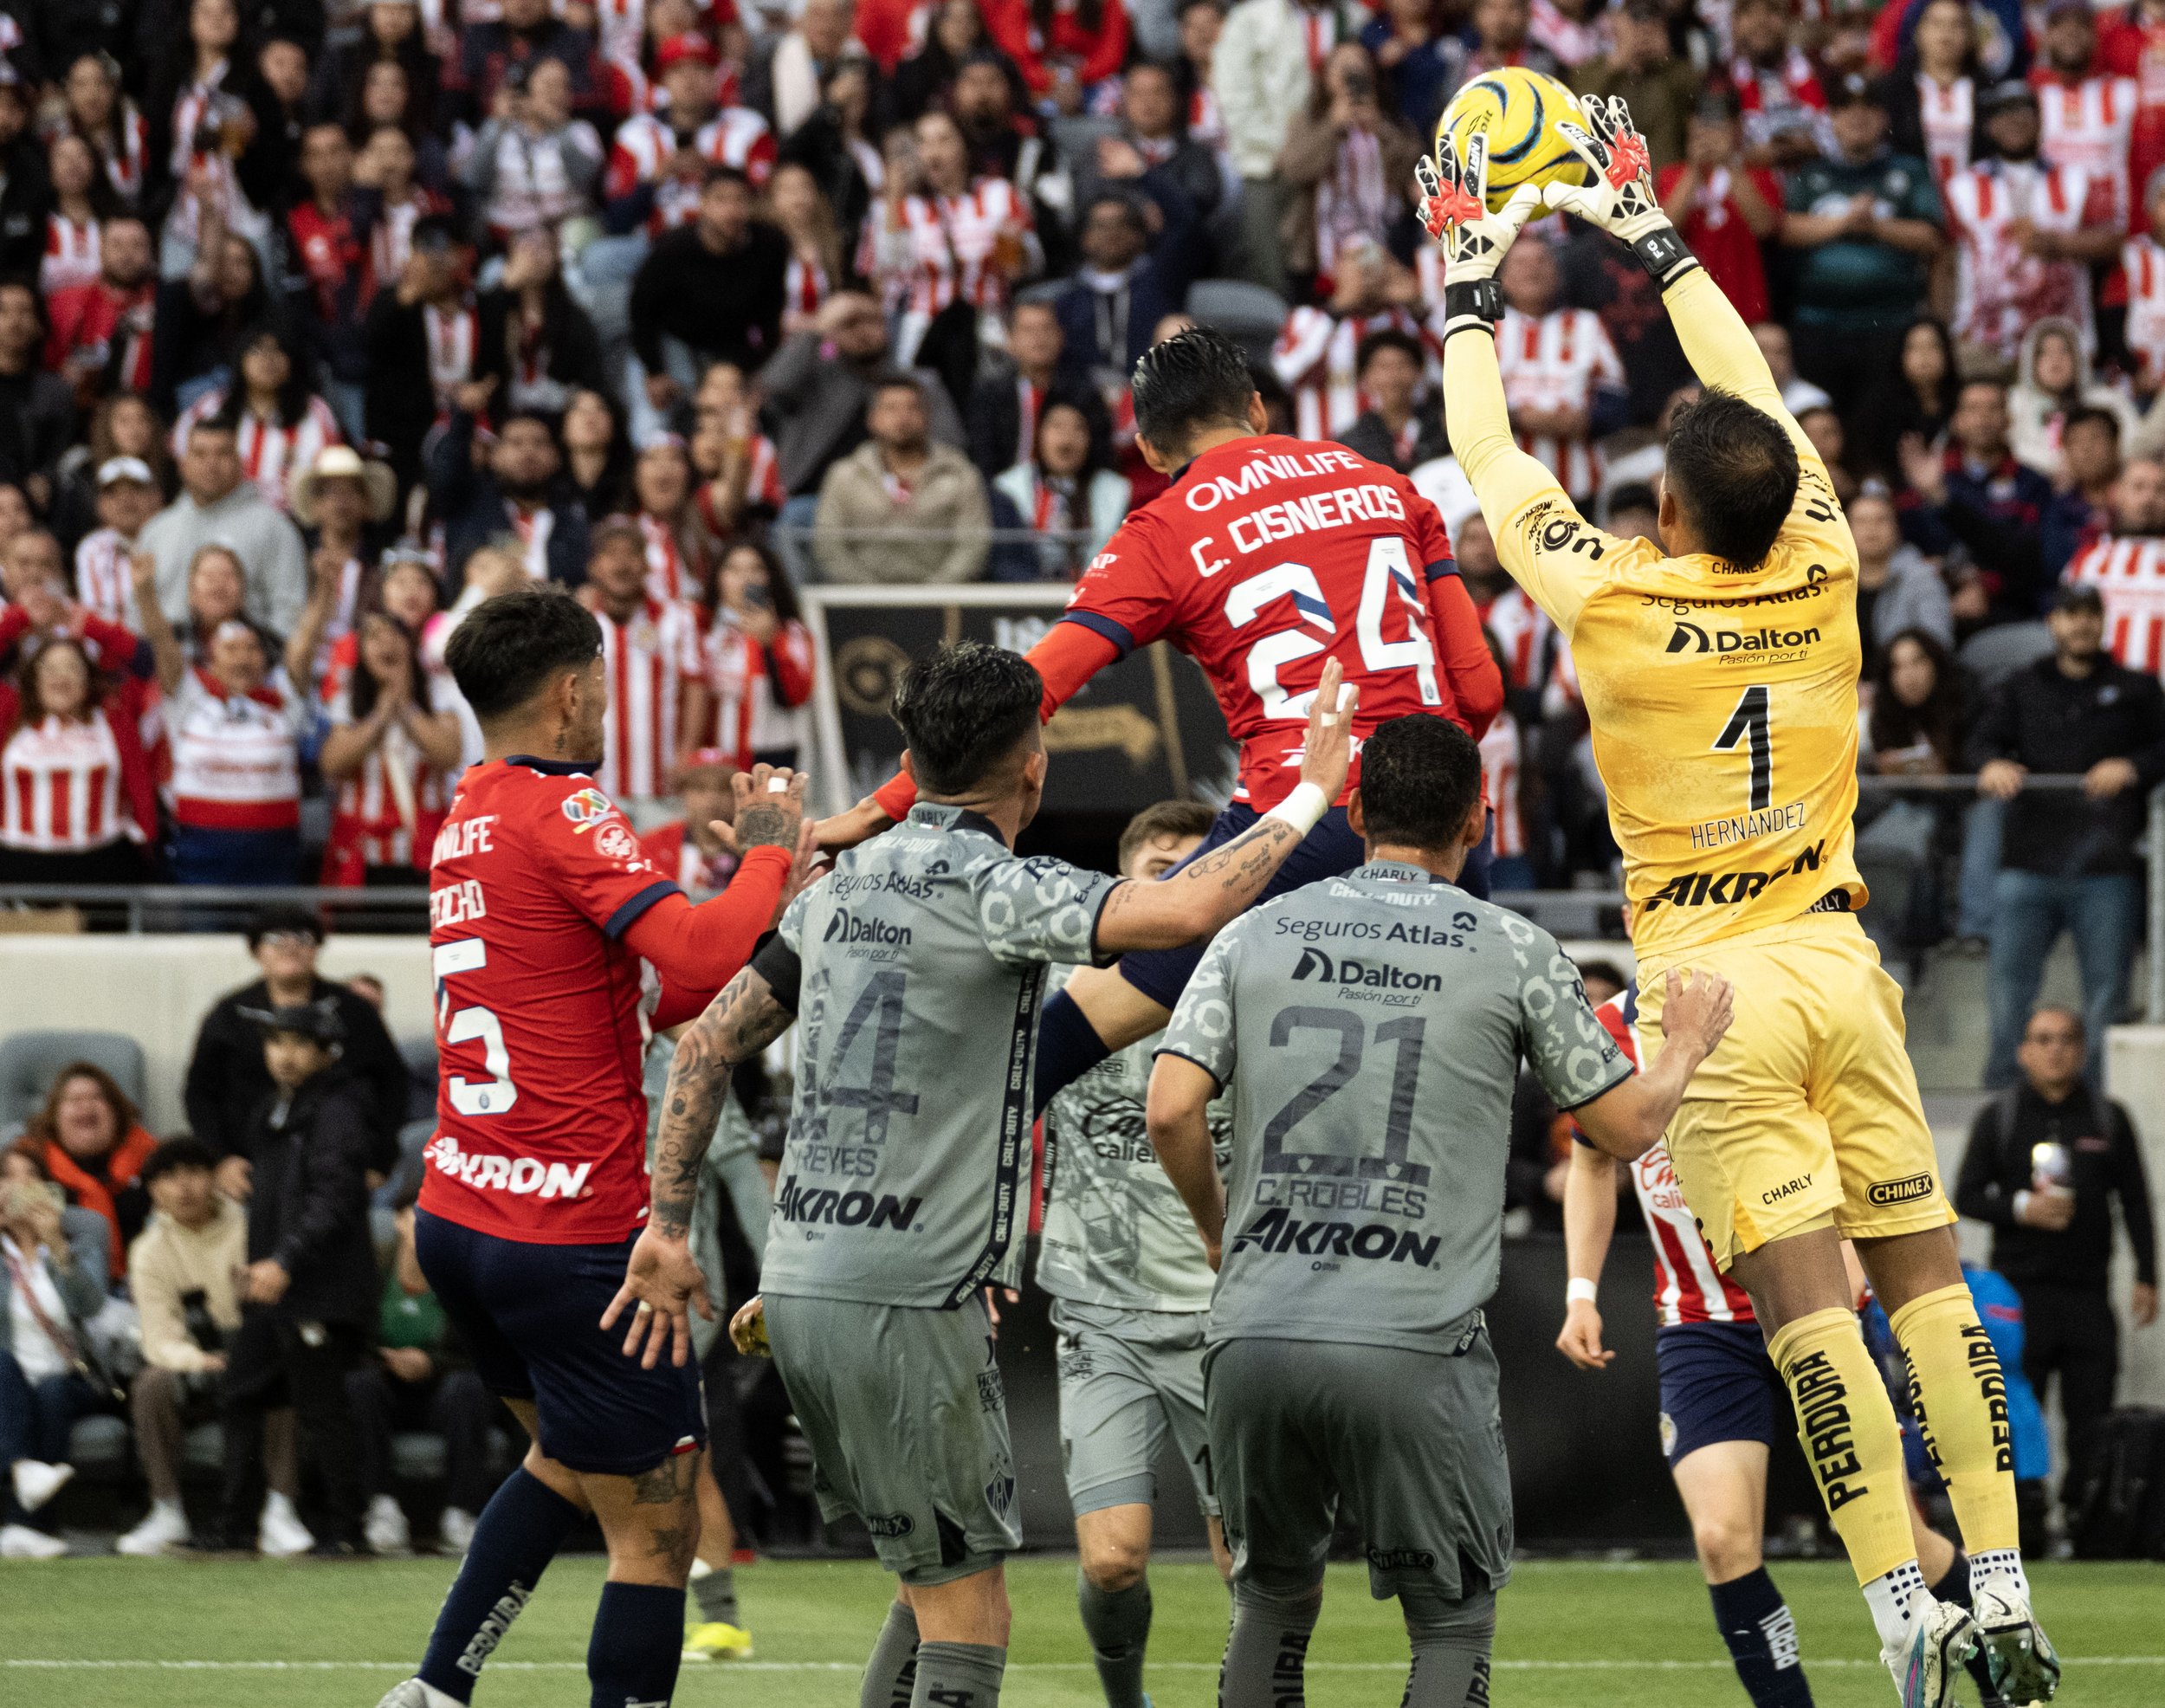  Atlas F.C. goalkeeper Jose Hernandez(1) jumps to catch the ball before Chivas midfielder Carlos Cisneros(24) can get to during their derby on Sunday, March 24 in BMO Stadium at Los Angeles, Calif. (Danilo Perez | The Corsair) 